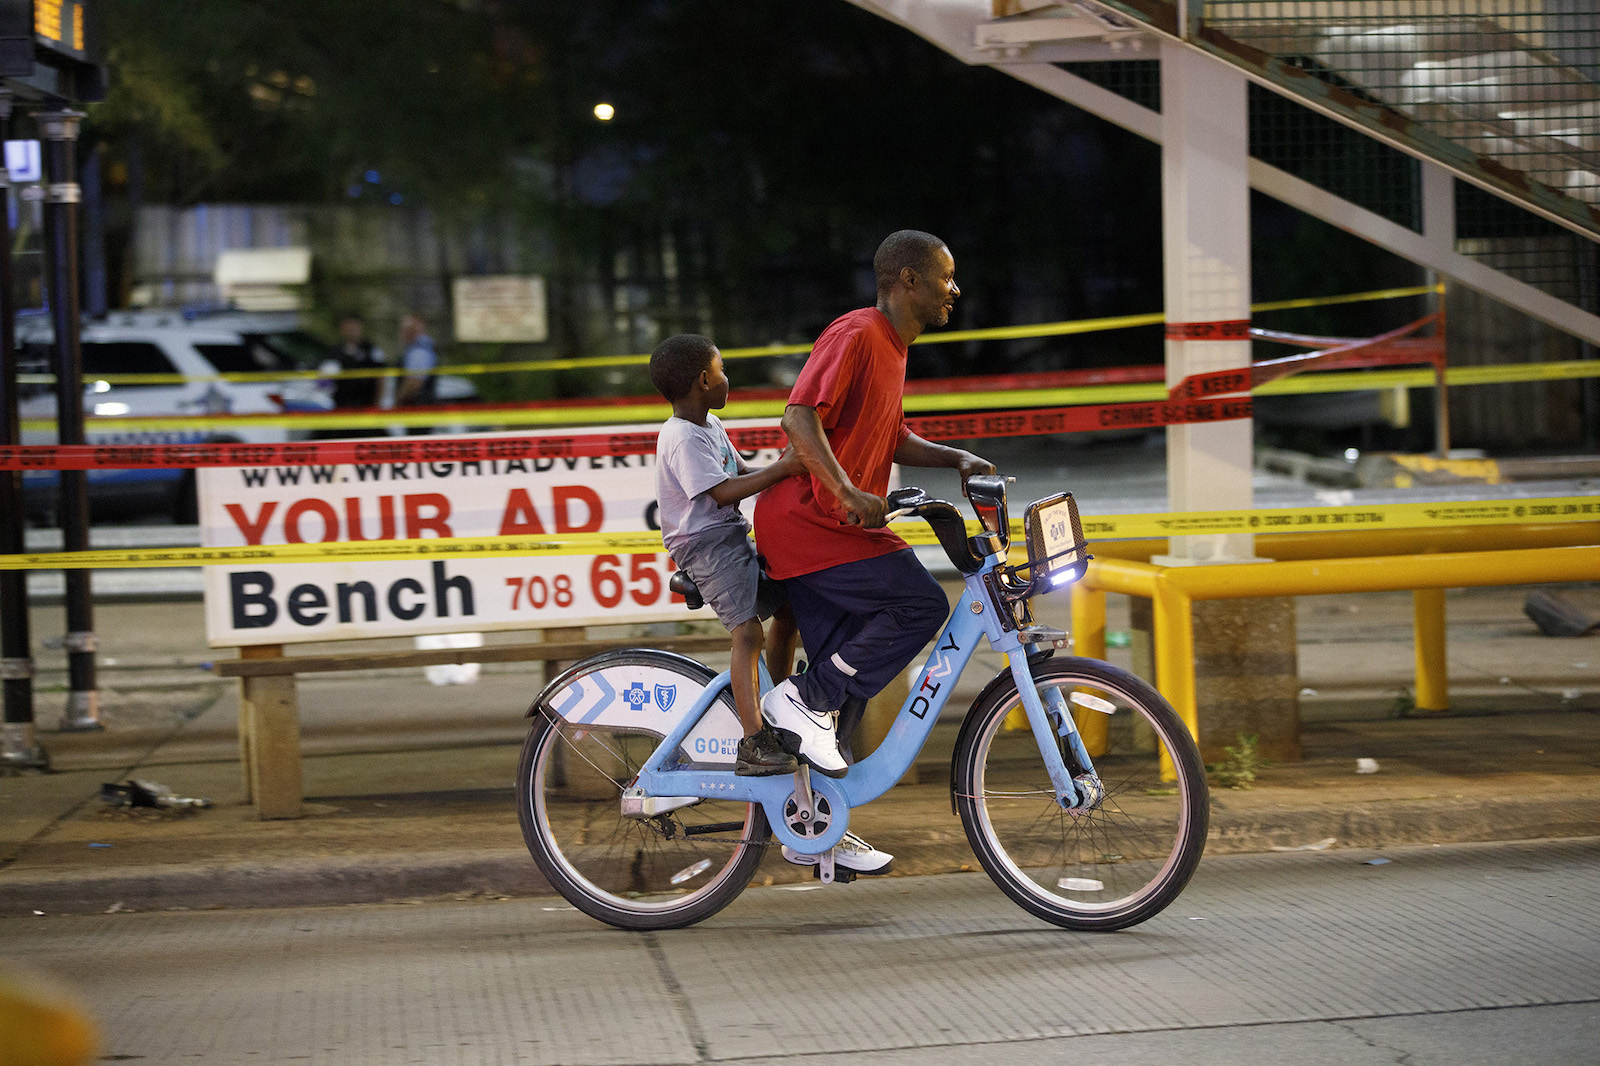 A man and child ride on a bike in Chicago.